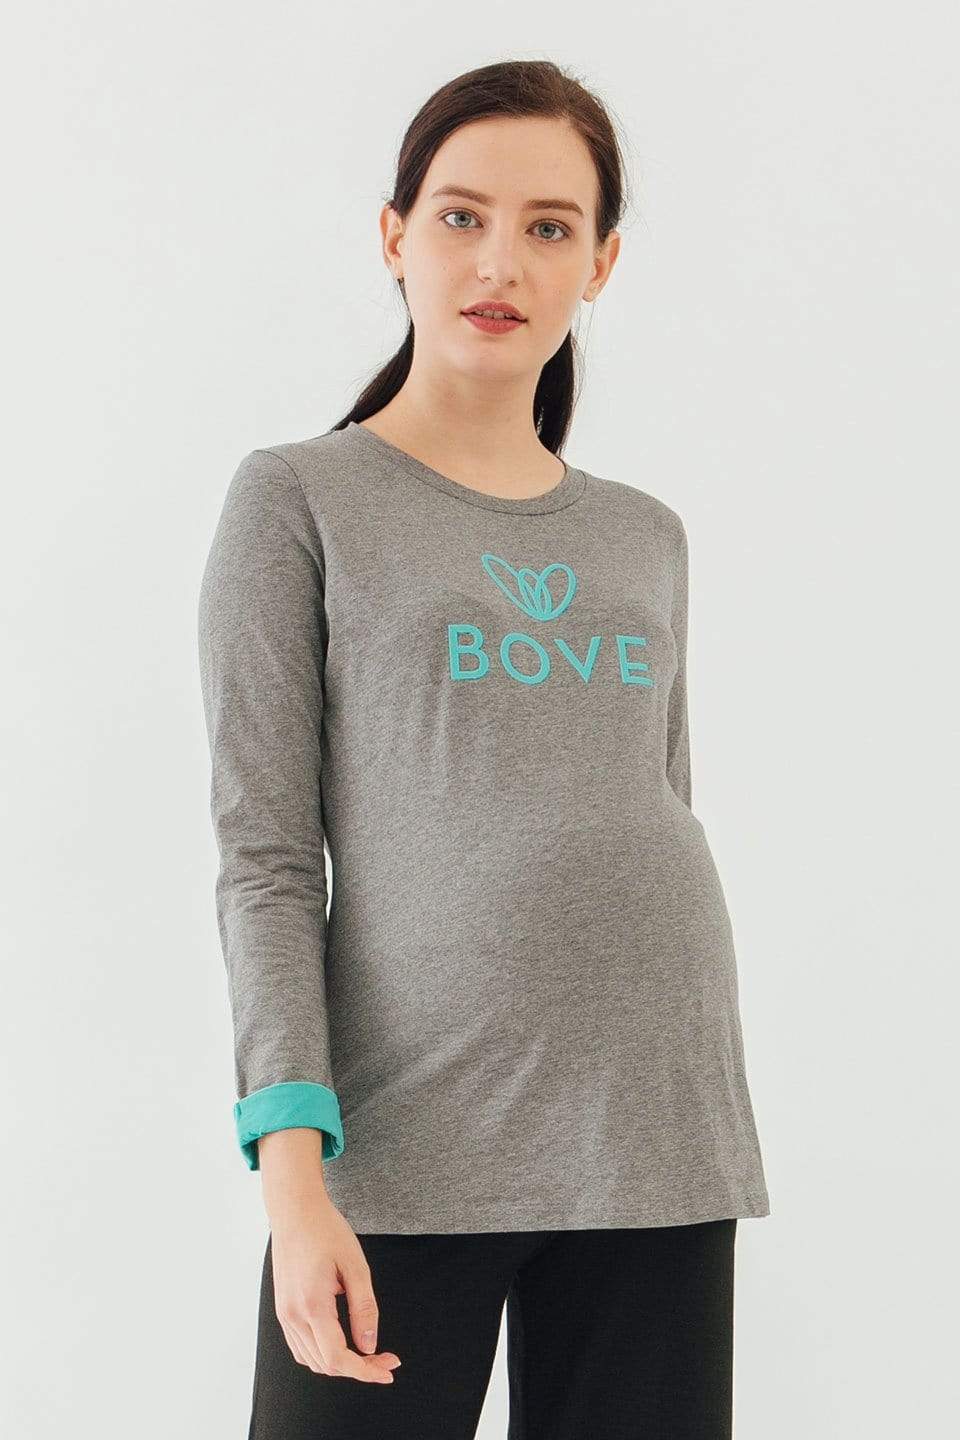 Bove – Page 3 – Spring Maternity